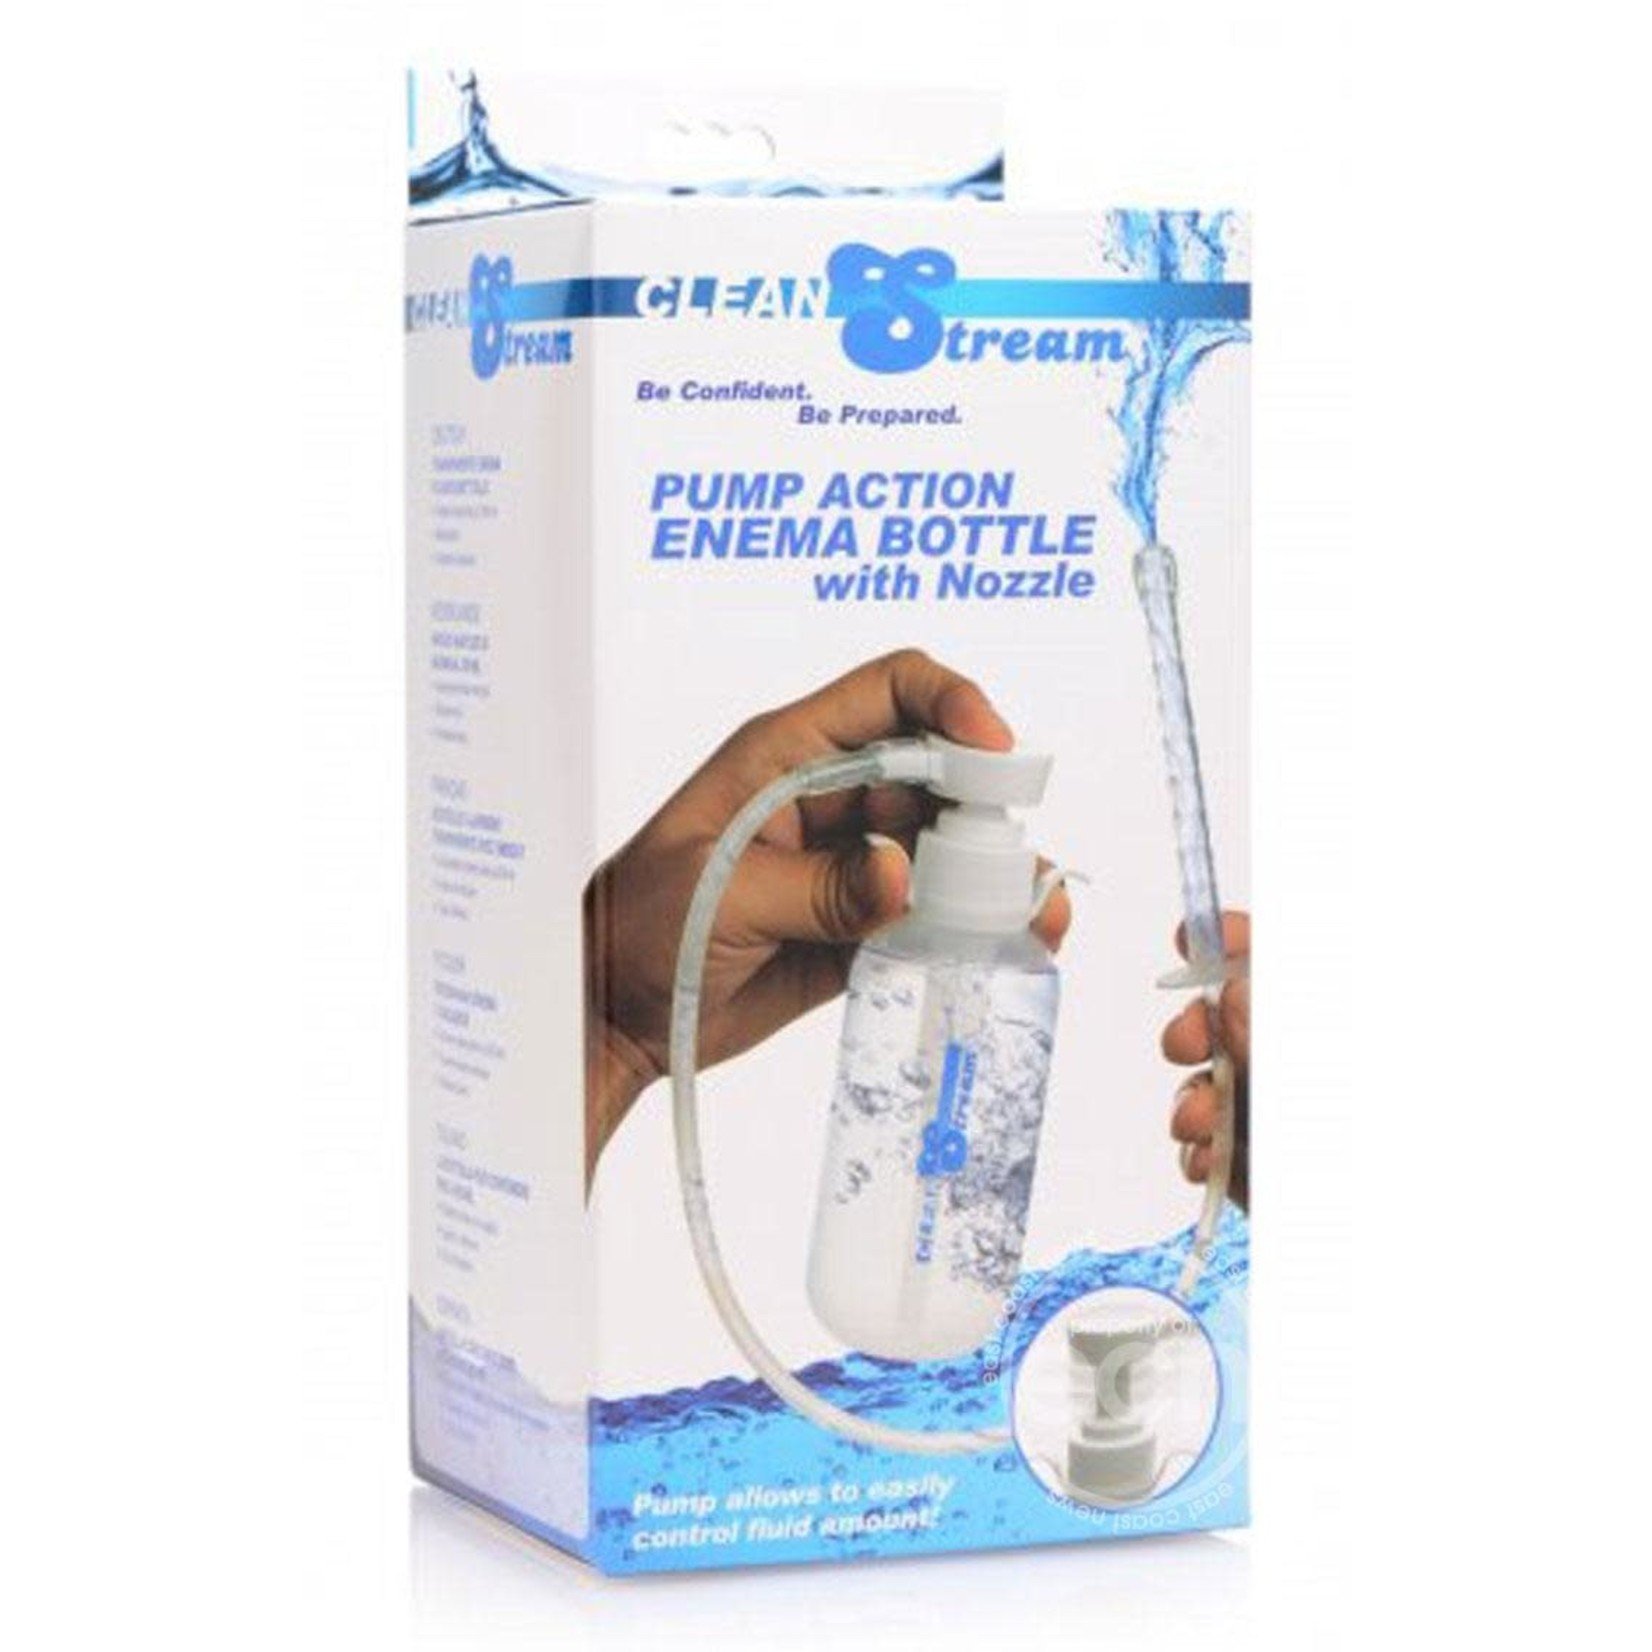 Cleanstream Pump Action Enema Bottle with Nozzle - Clear